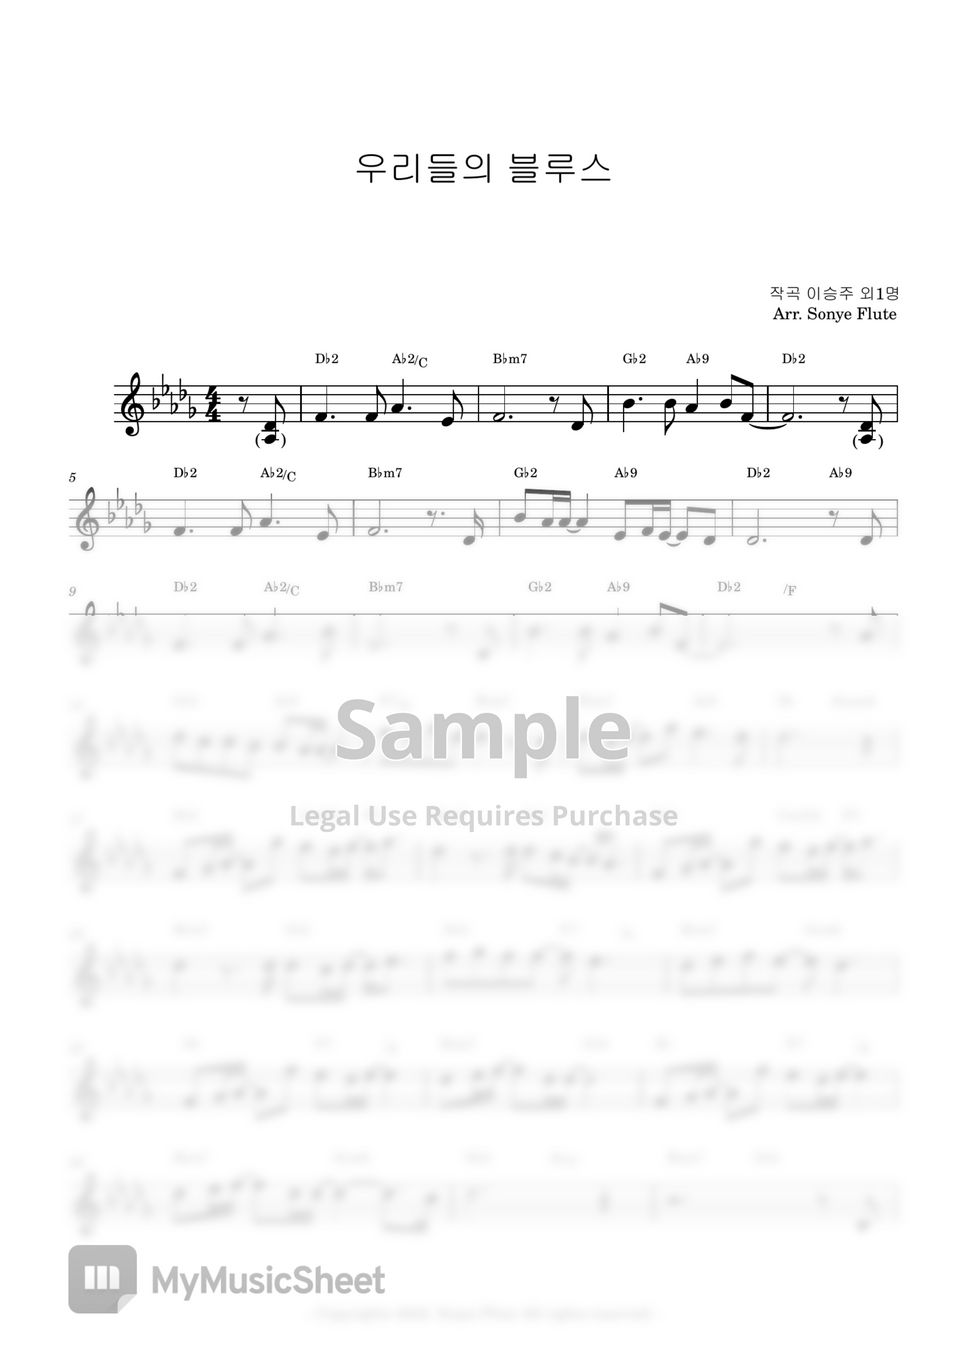 Lim Young Woong 임영웅 - Our Blues 우리들의 블루스 (Flute Sheet Music) by sonye flute